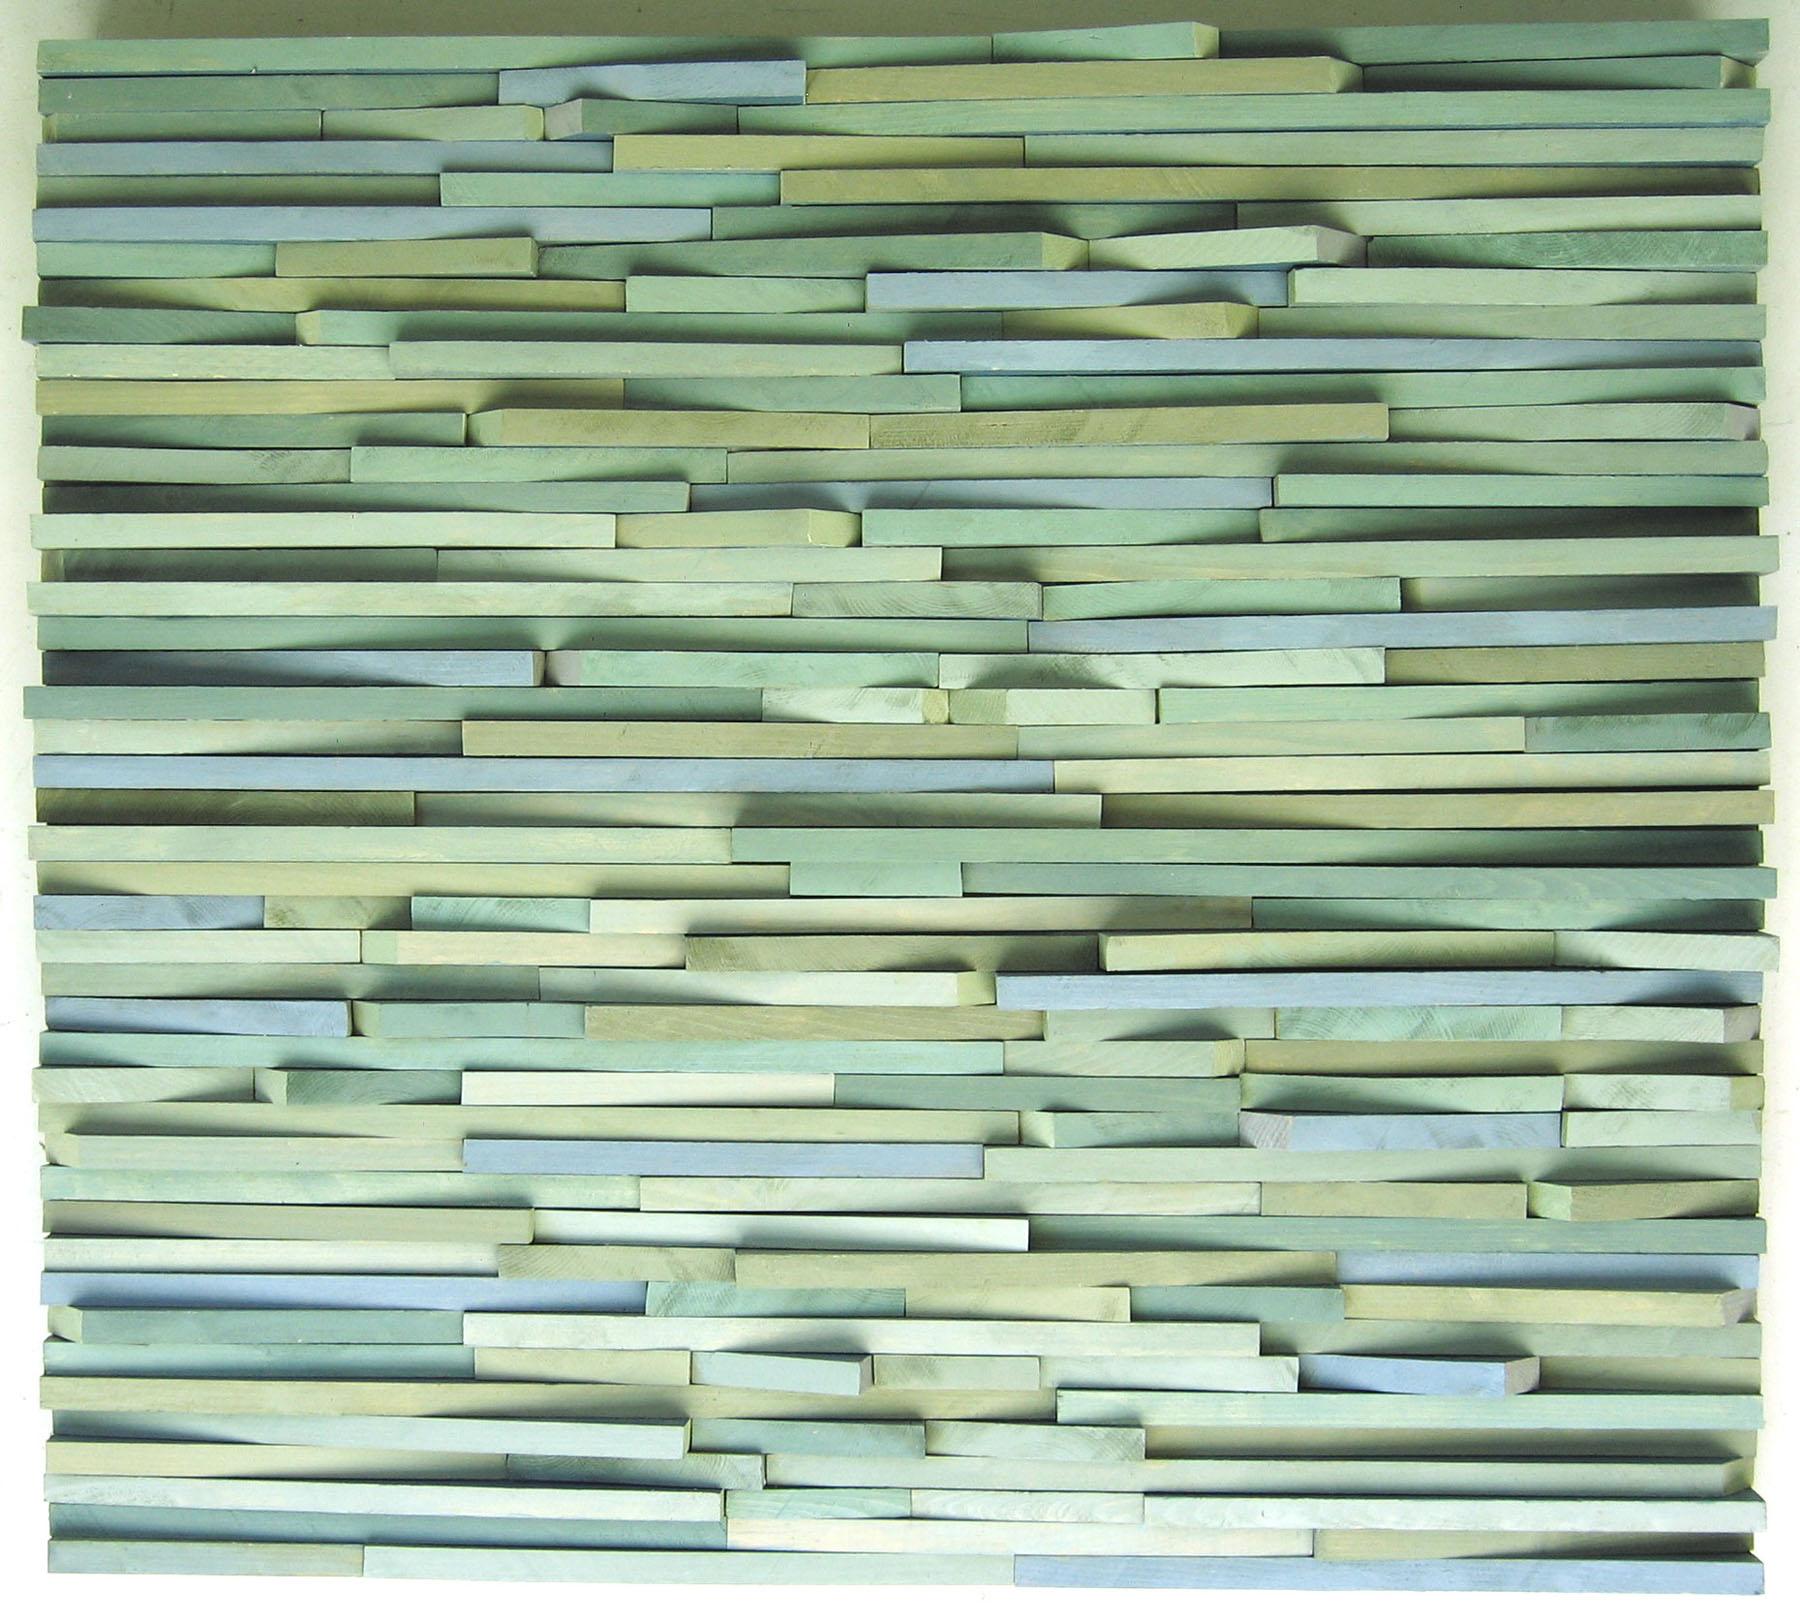 Sargasso ( Abstract New Brutalism 3D Wooden Wall Sculpture in Blues and Greens) 